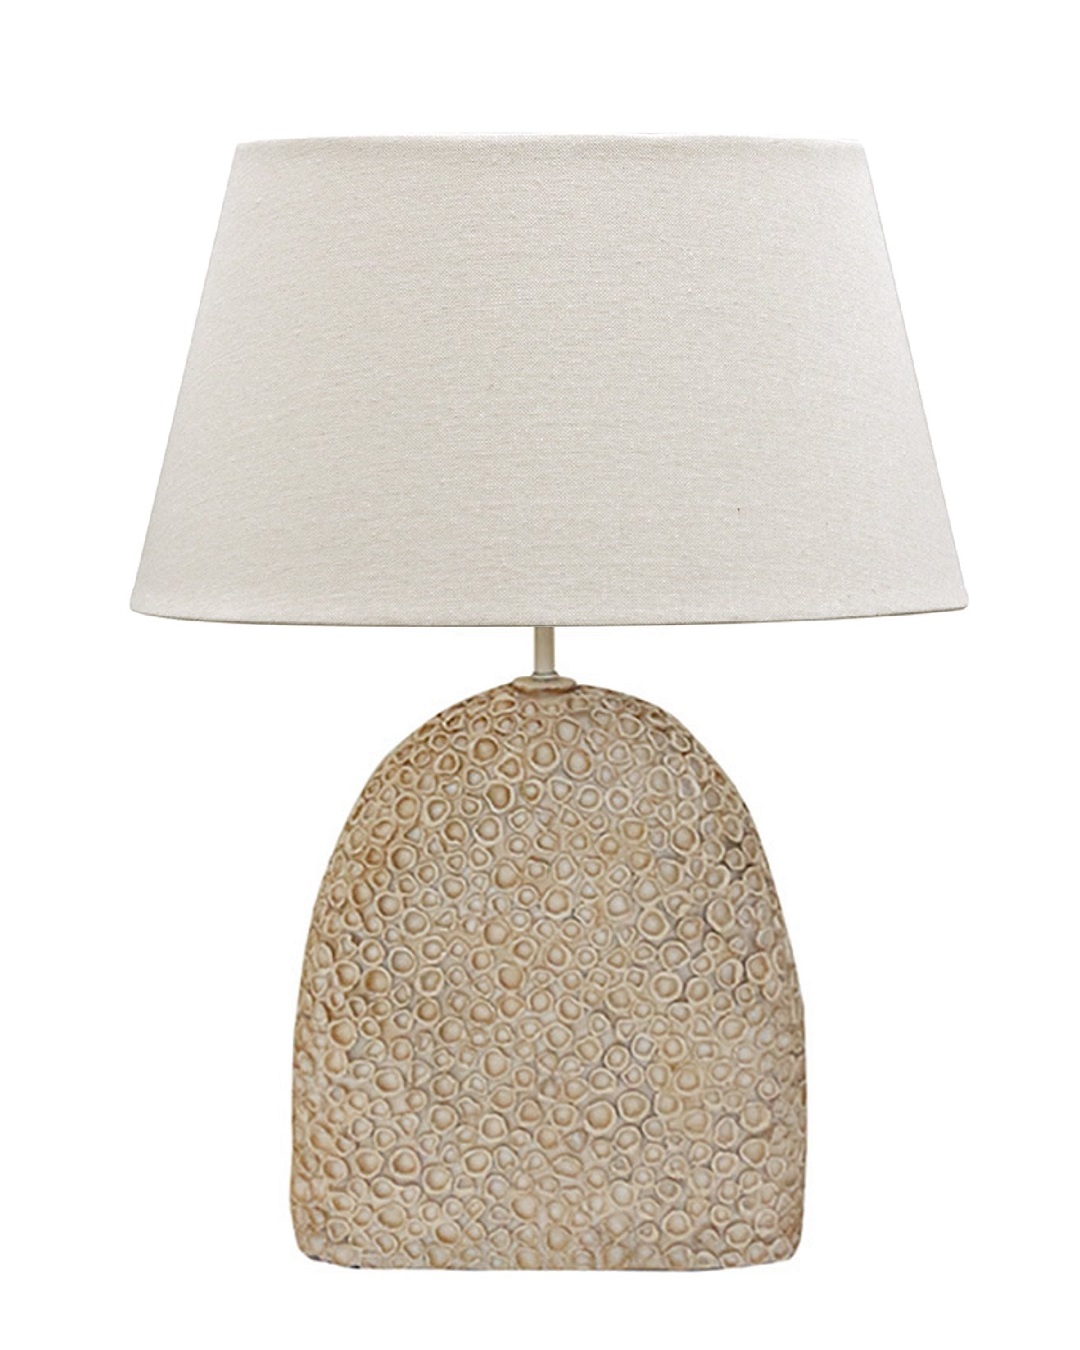 Cape cod lamp and shade